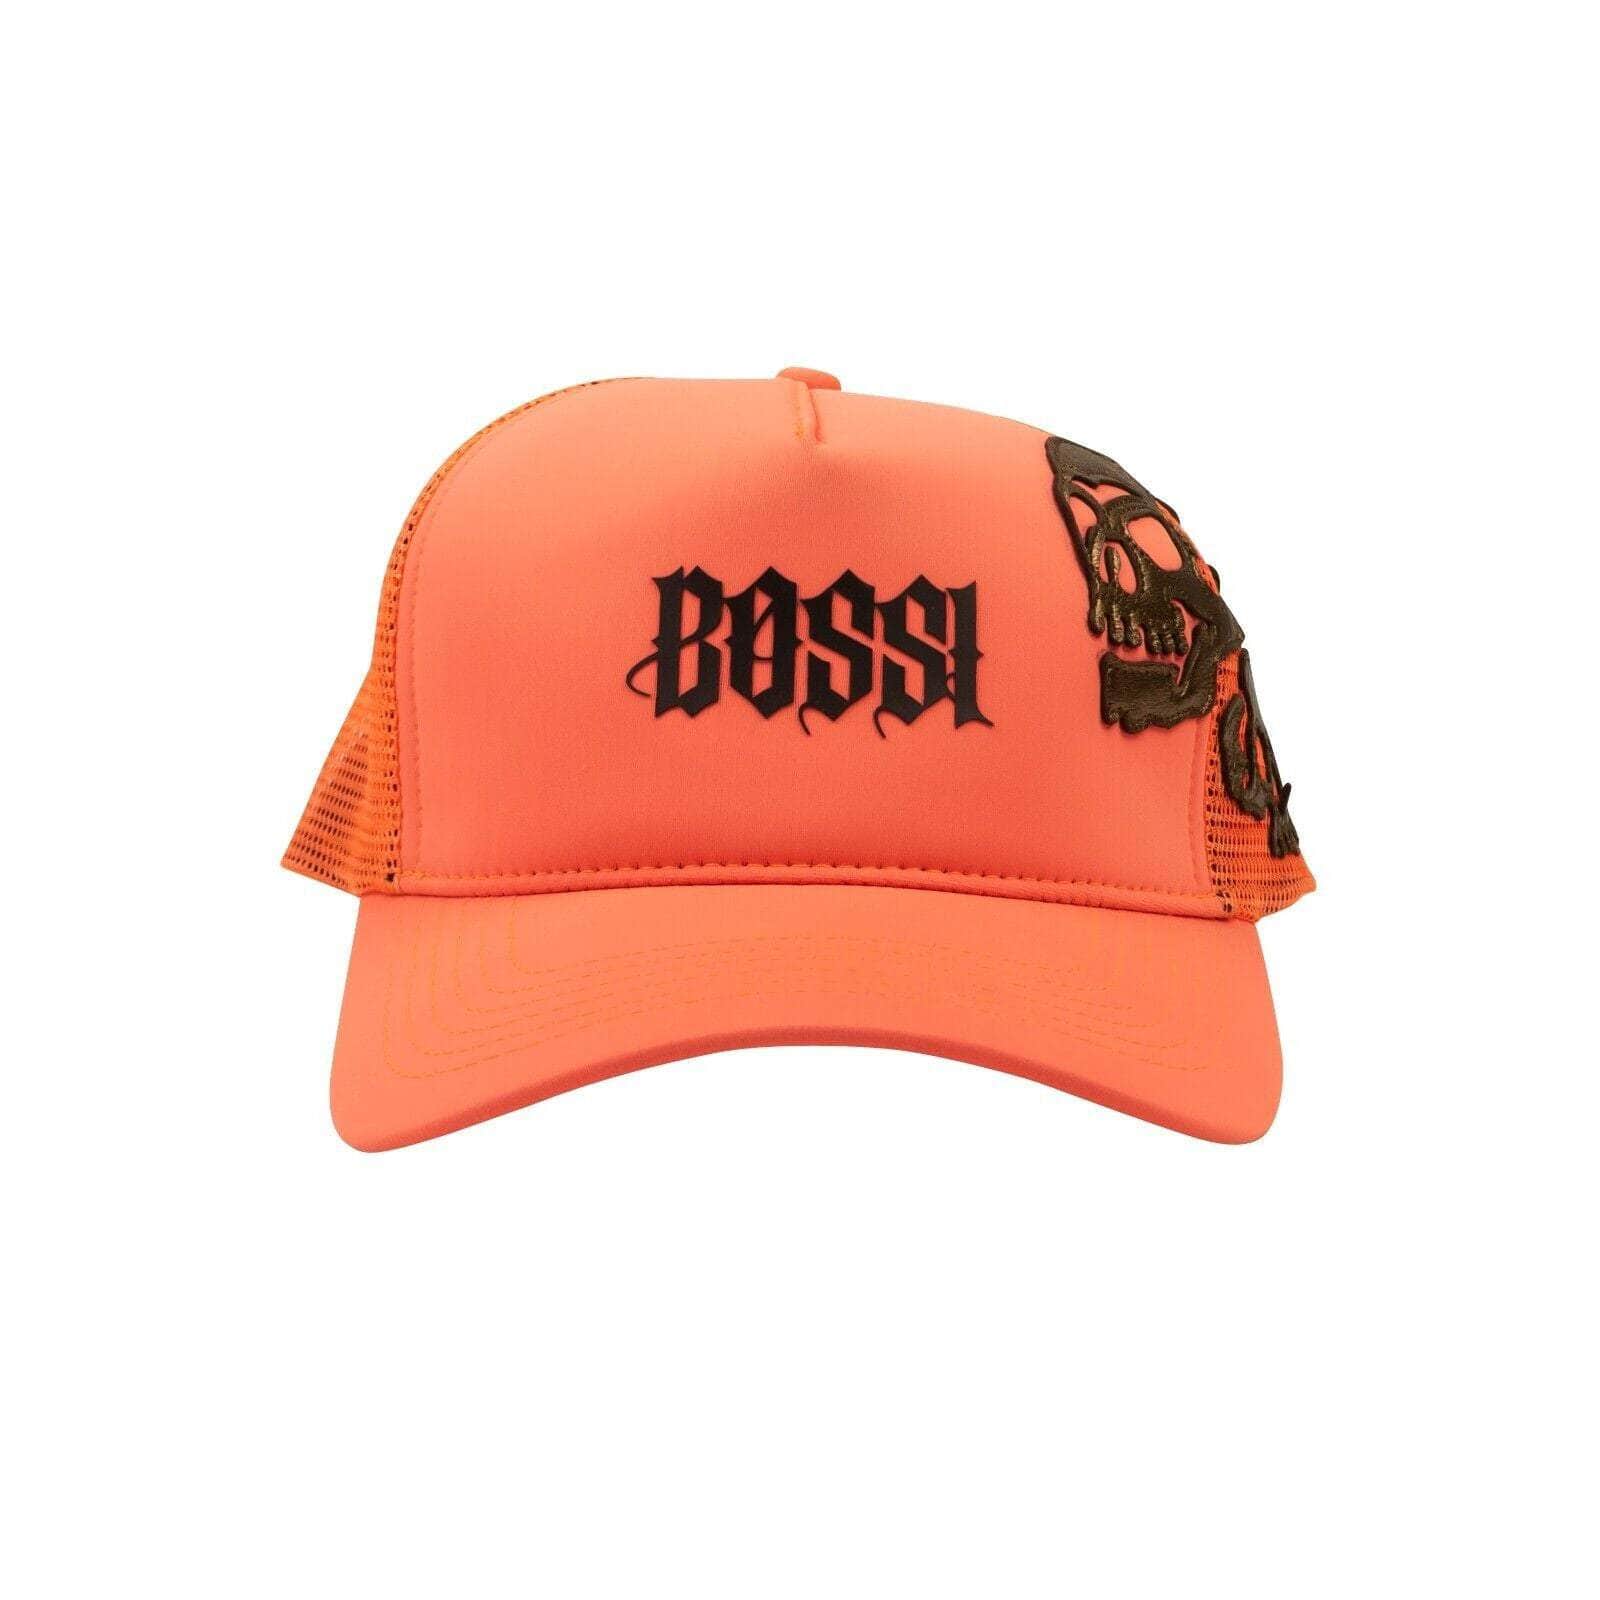 Bossi bossi, channelenable-all, chicmi, couponcollection, gender-mens, main-accessories, mens-shoes, size-os, under-250 OS Orange Skull Logo Trucker Hat BOS-XACC-0002/OS BOS-XACC-0002/OS